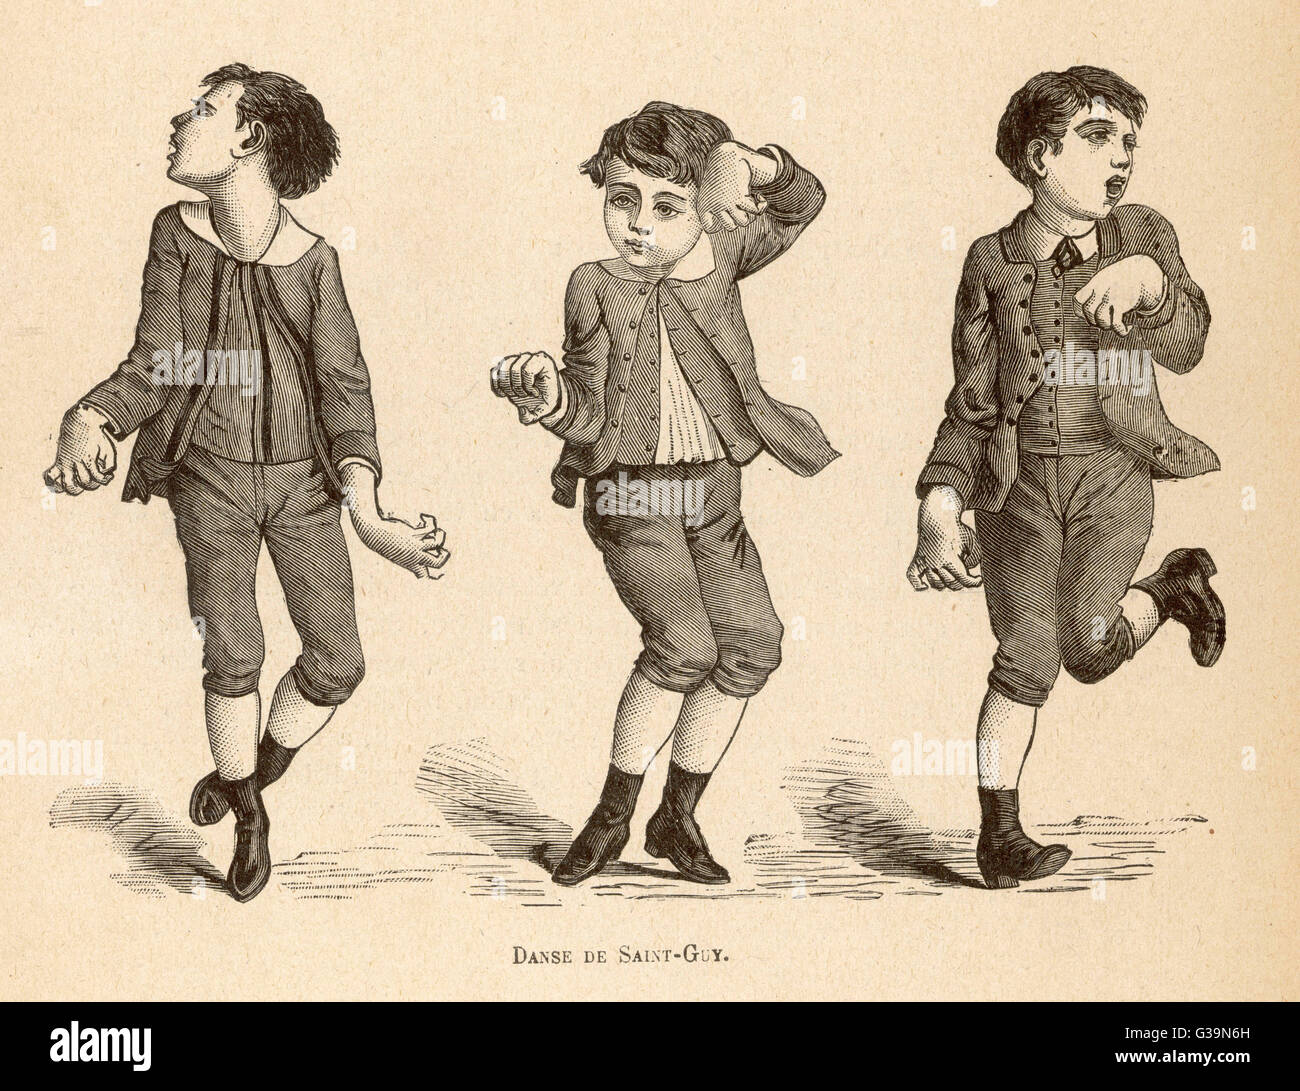 Boys afflicted with Chorea,  known as St Vitus' dance, or  as Danse de Saint-Guy in  France        Date: circa 1880 Stock Photo